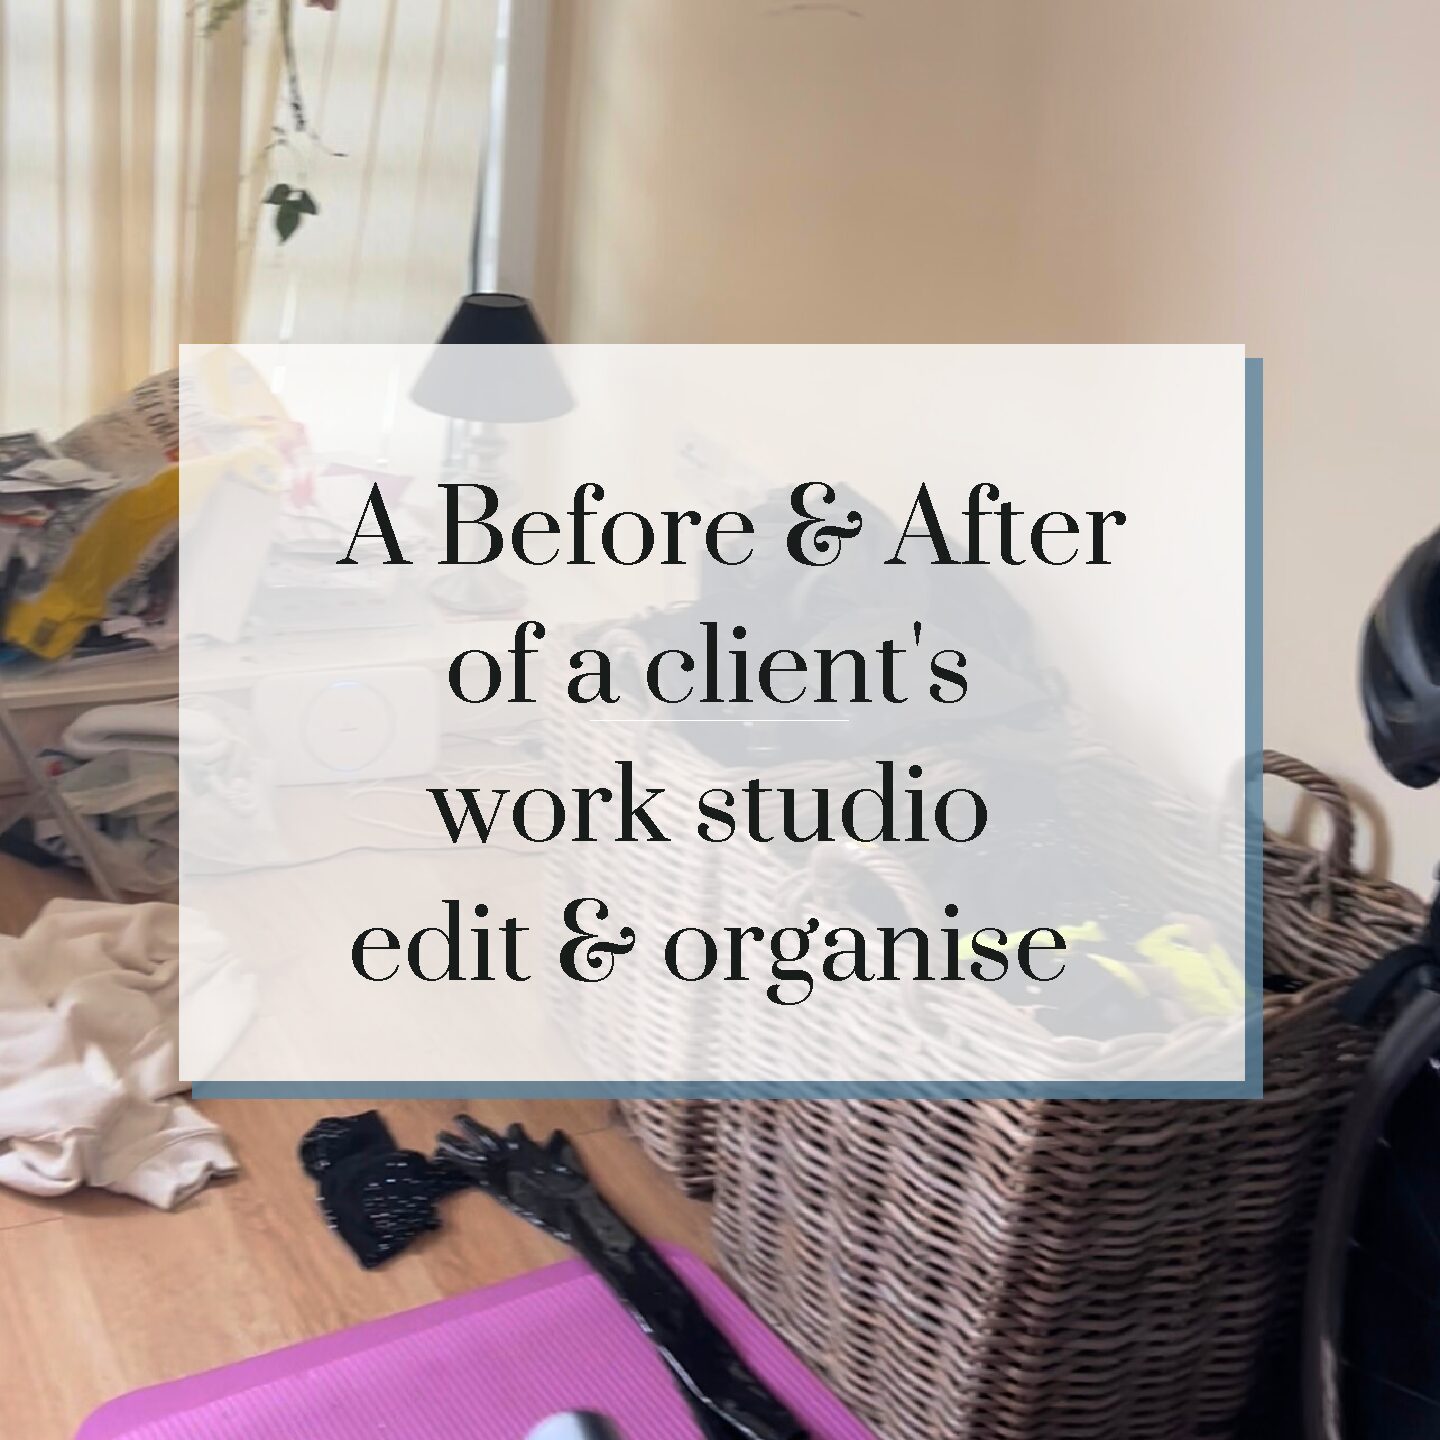 A Before & After of a client’s work studio edit & organise